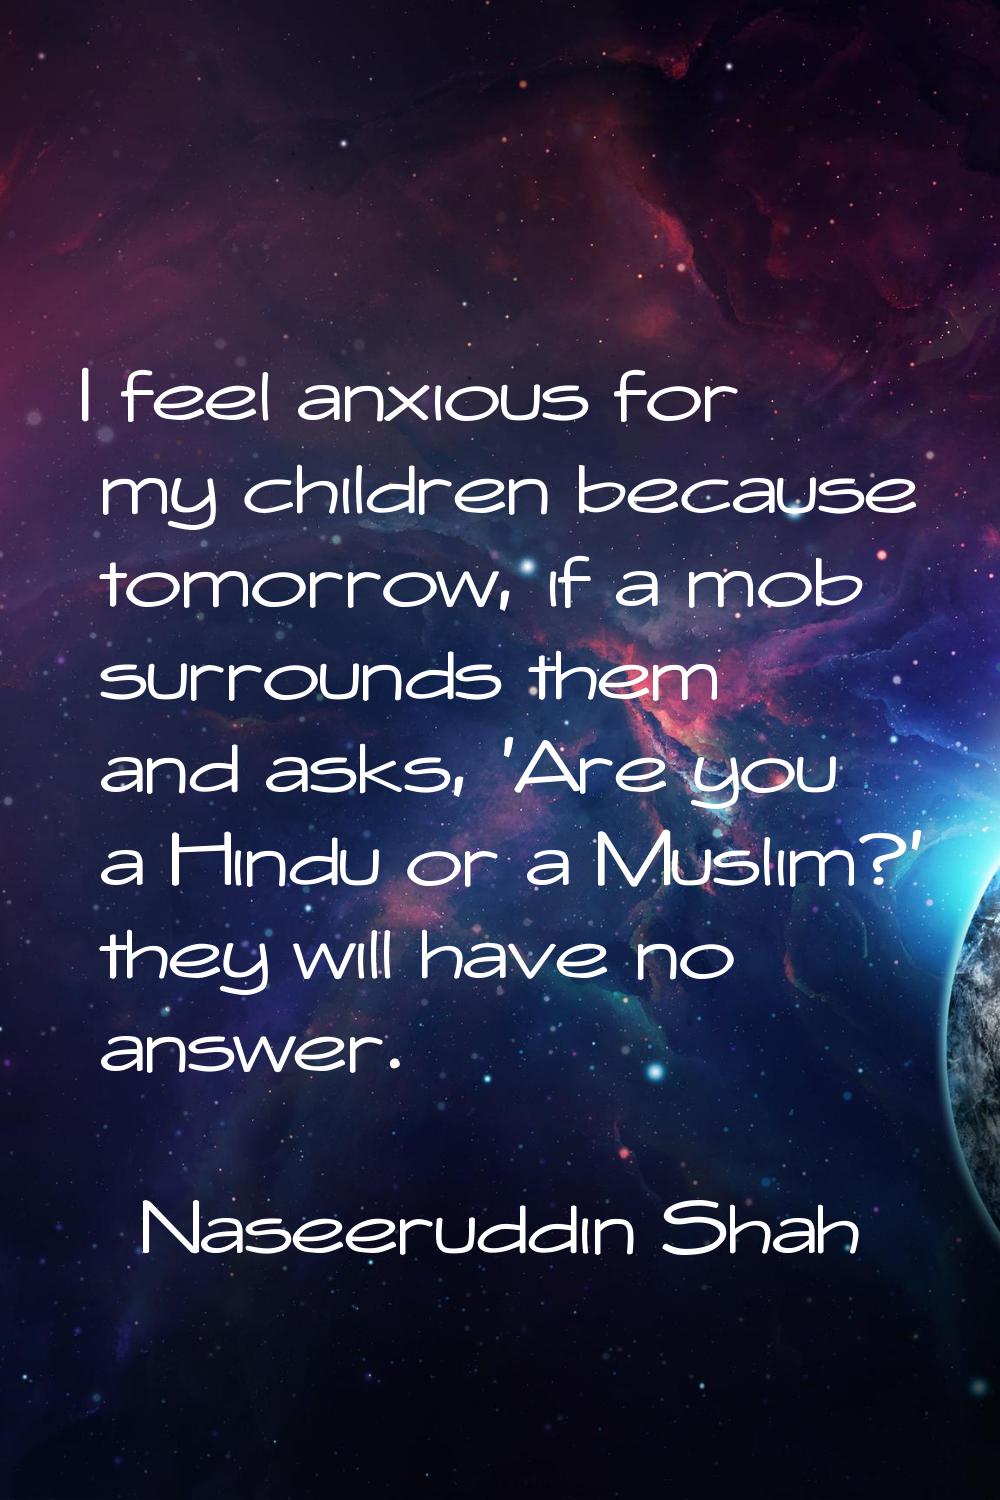 I feel anxious for my children because tomorrow, if a mob surrounds them and asks, 'Are you a Hindu